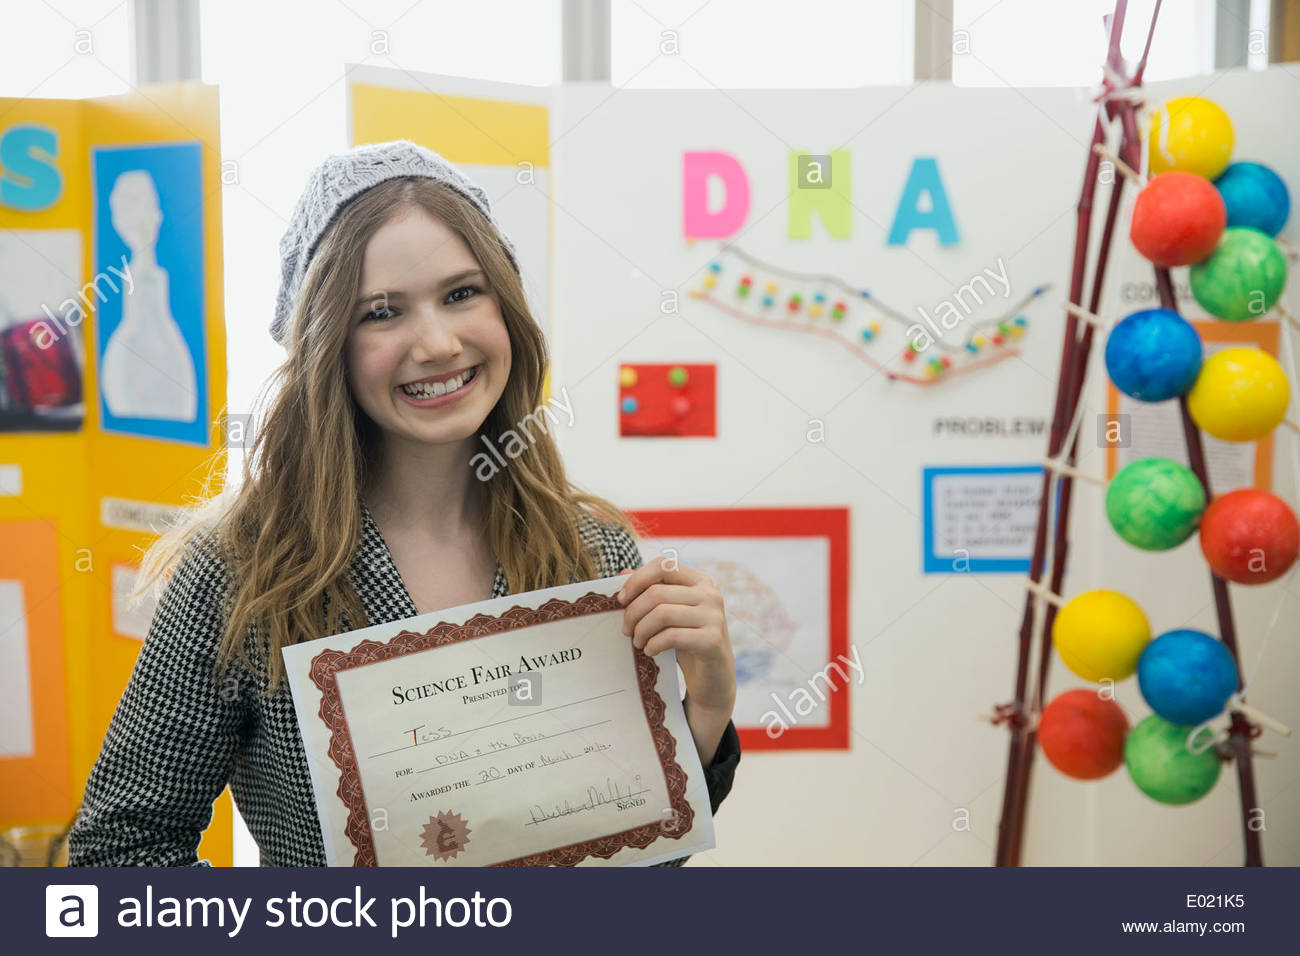 Portrait of school girl with award at science fair Stock Photo